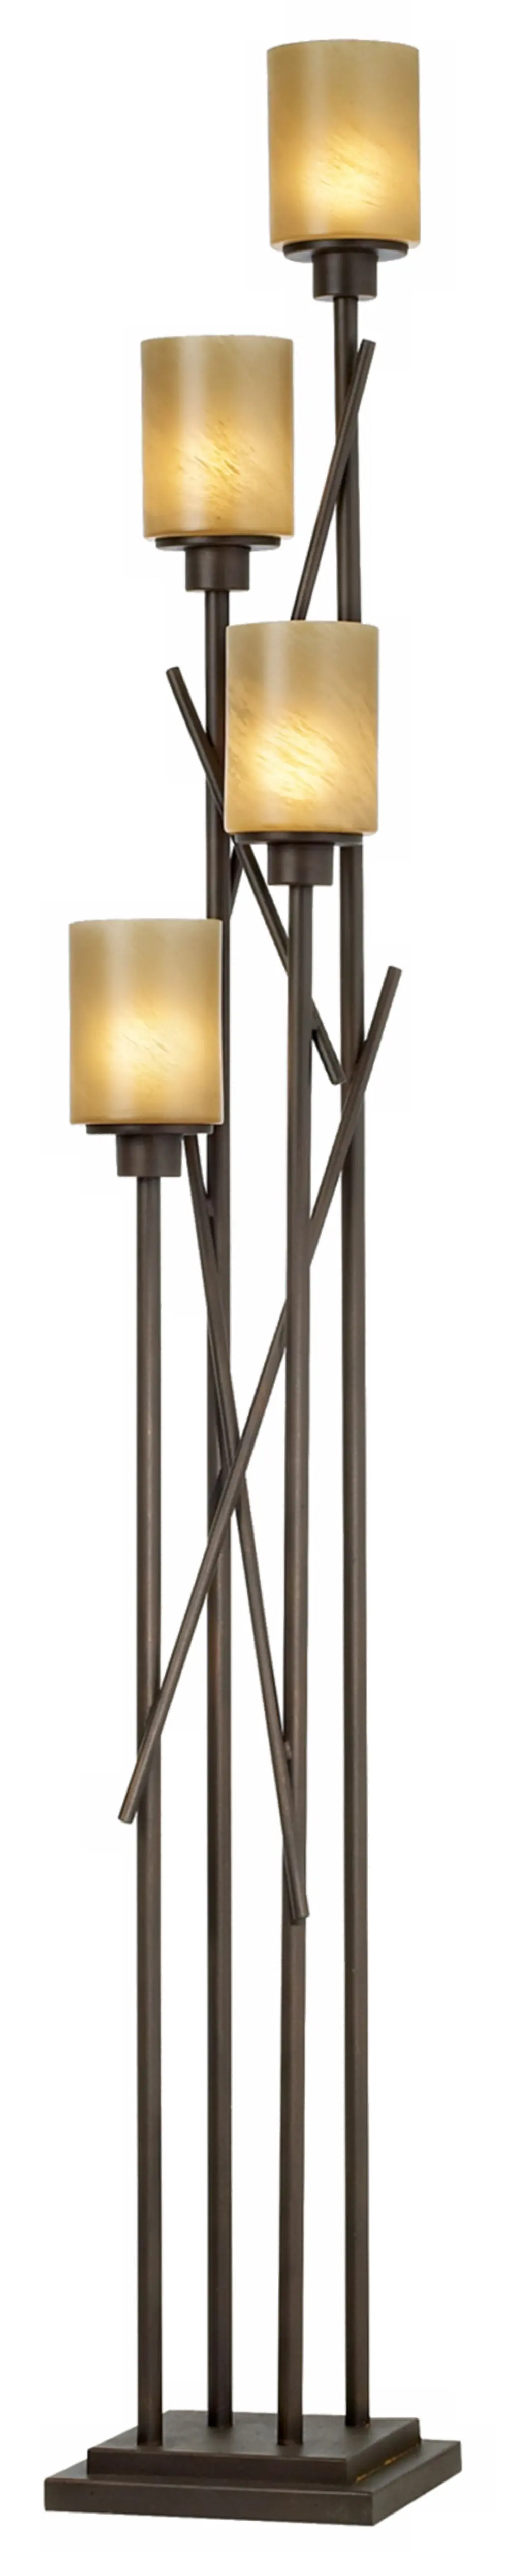 Bronze Uplight Floor Lamp With Amber Shades - City Crossings-1